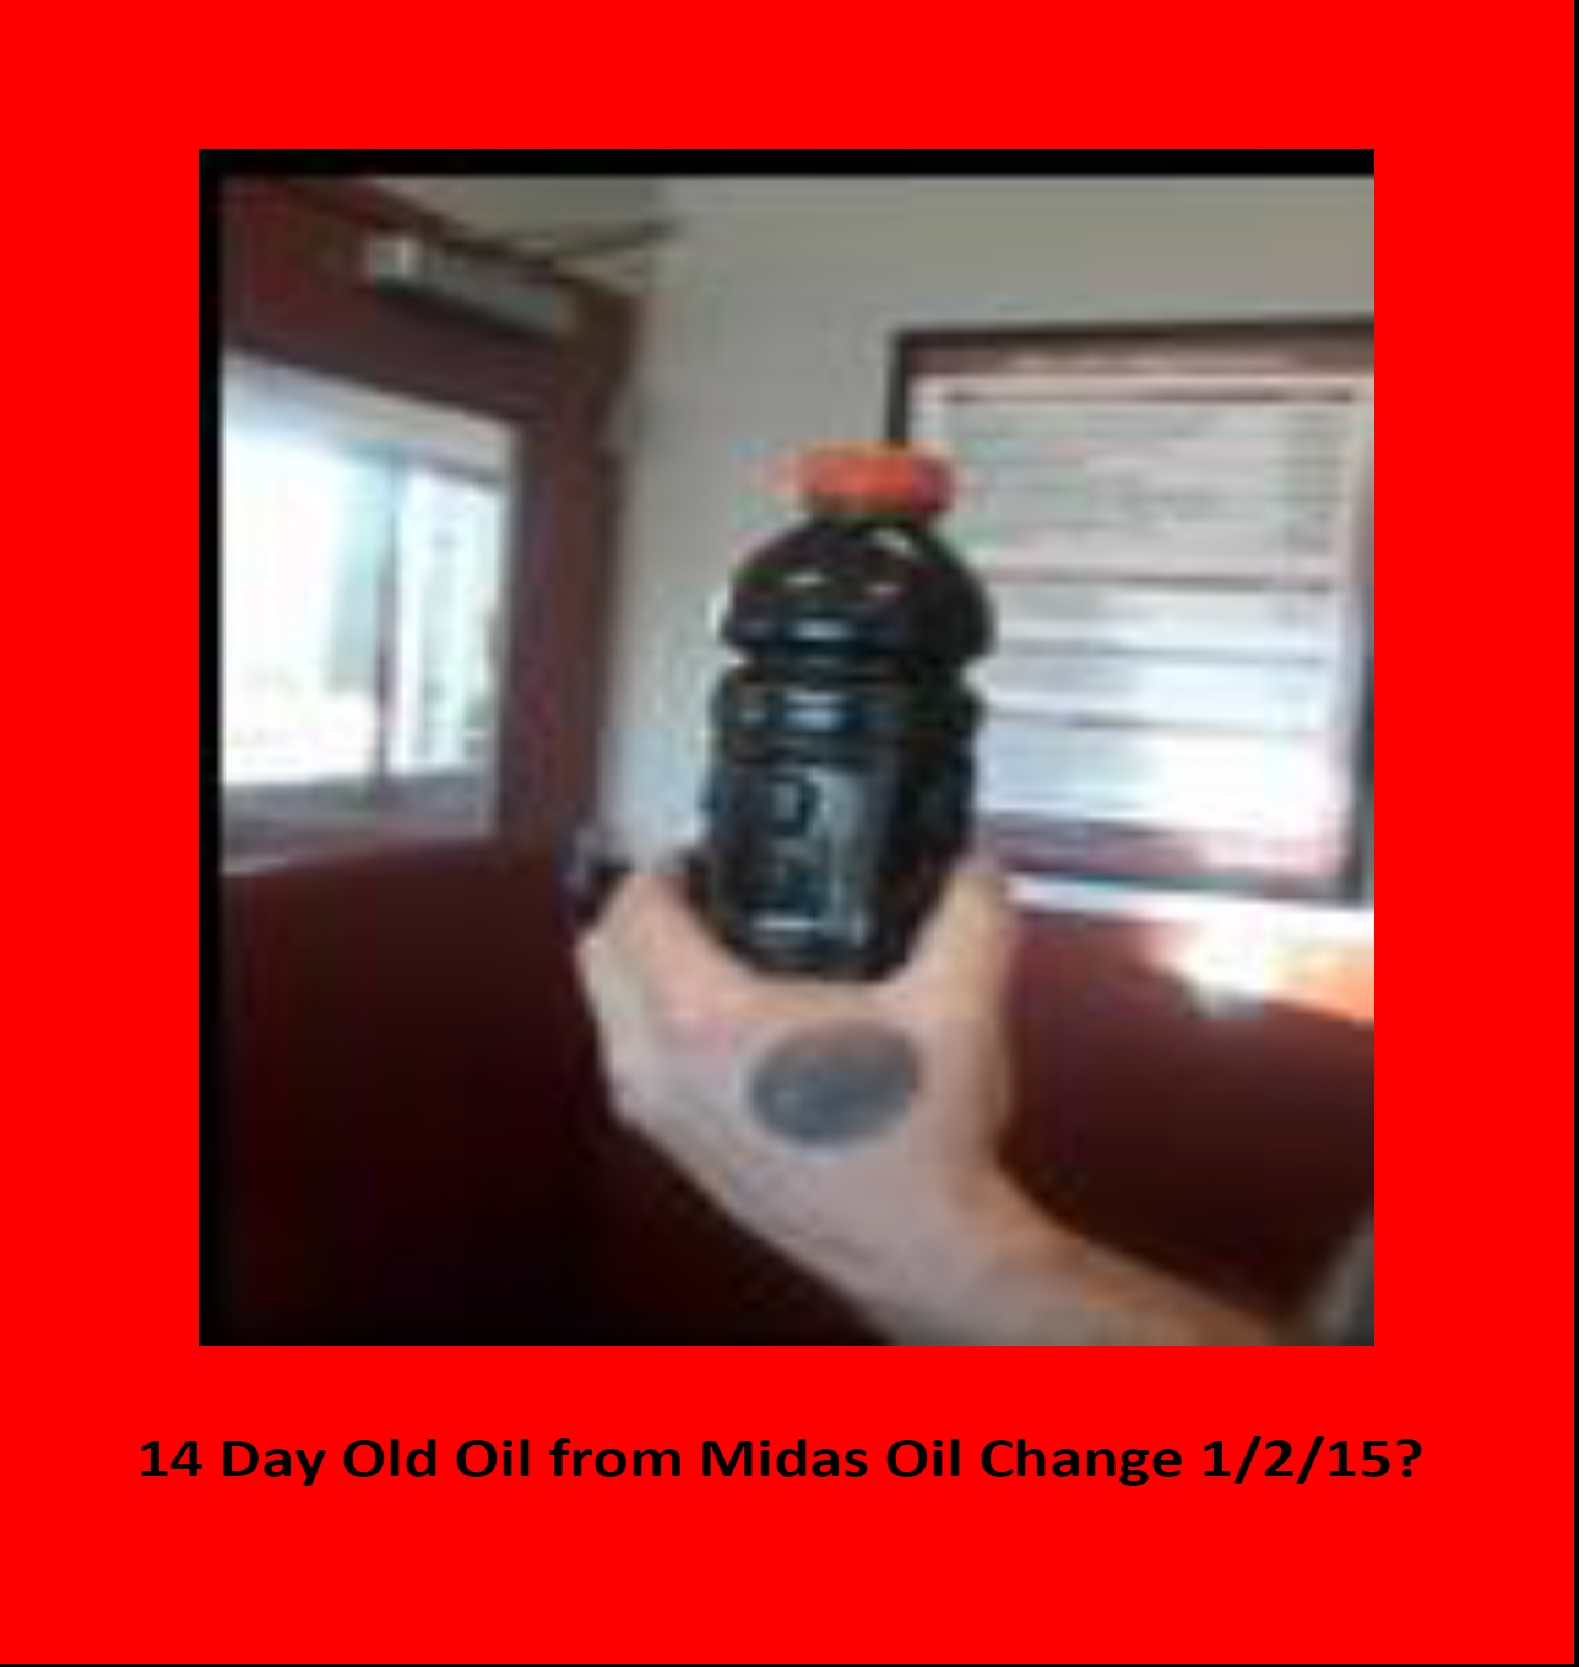 The14 day old Midas (new) Oil .... that was Drained by Jiffy Lube Inspectors..... 